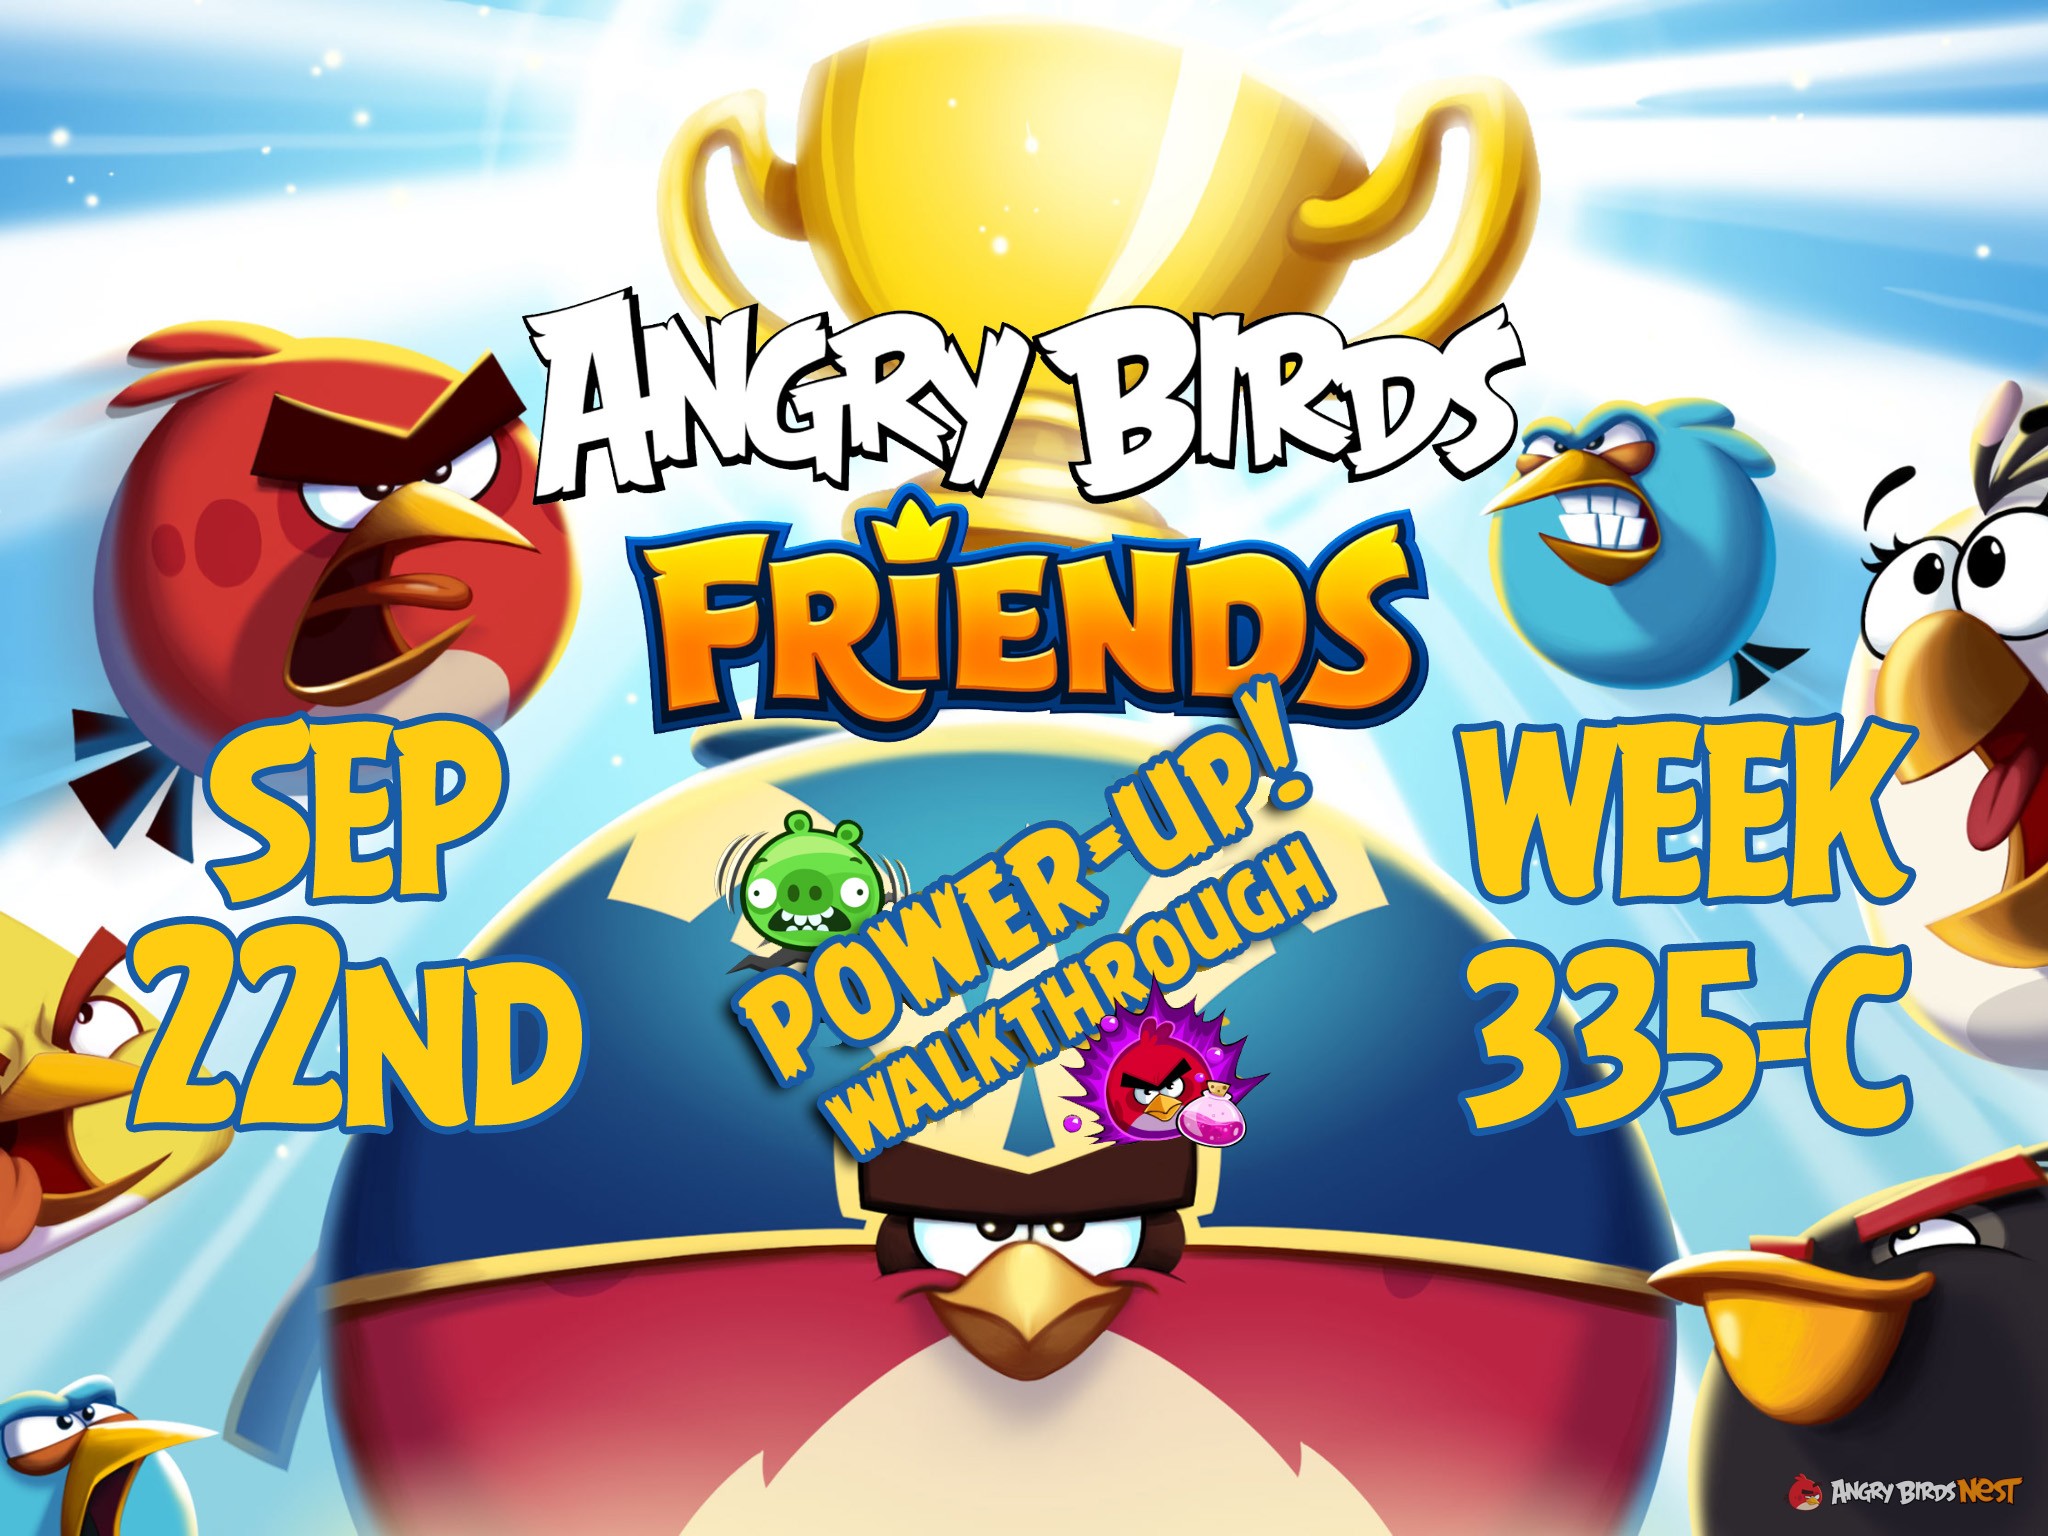 Angry-Birds-Friends-Tournament-Week-335-C-Feature-Image-PU